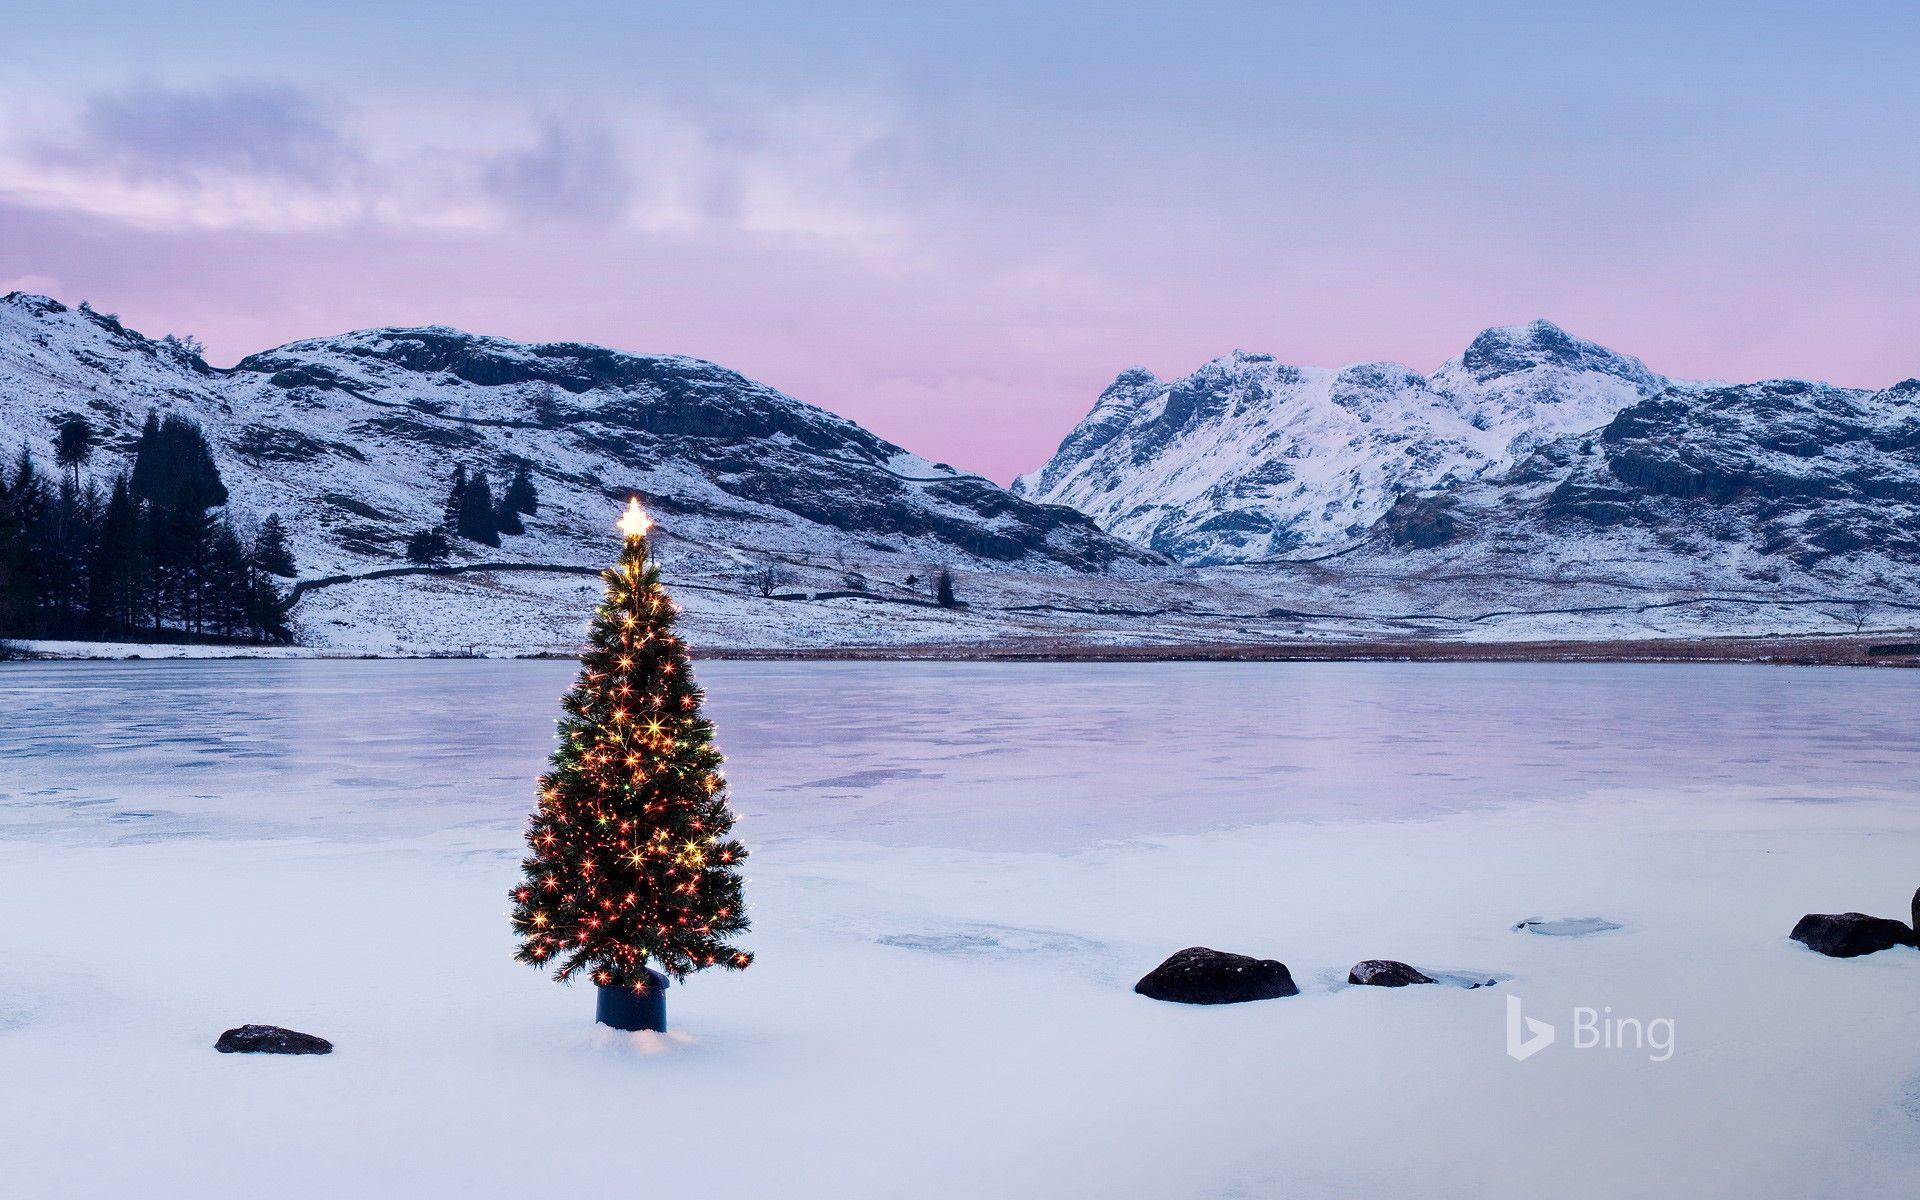 The Langdale Pikes with an illuminated Christmas tree, Lake District